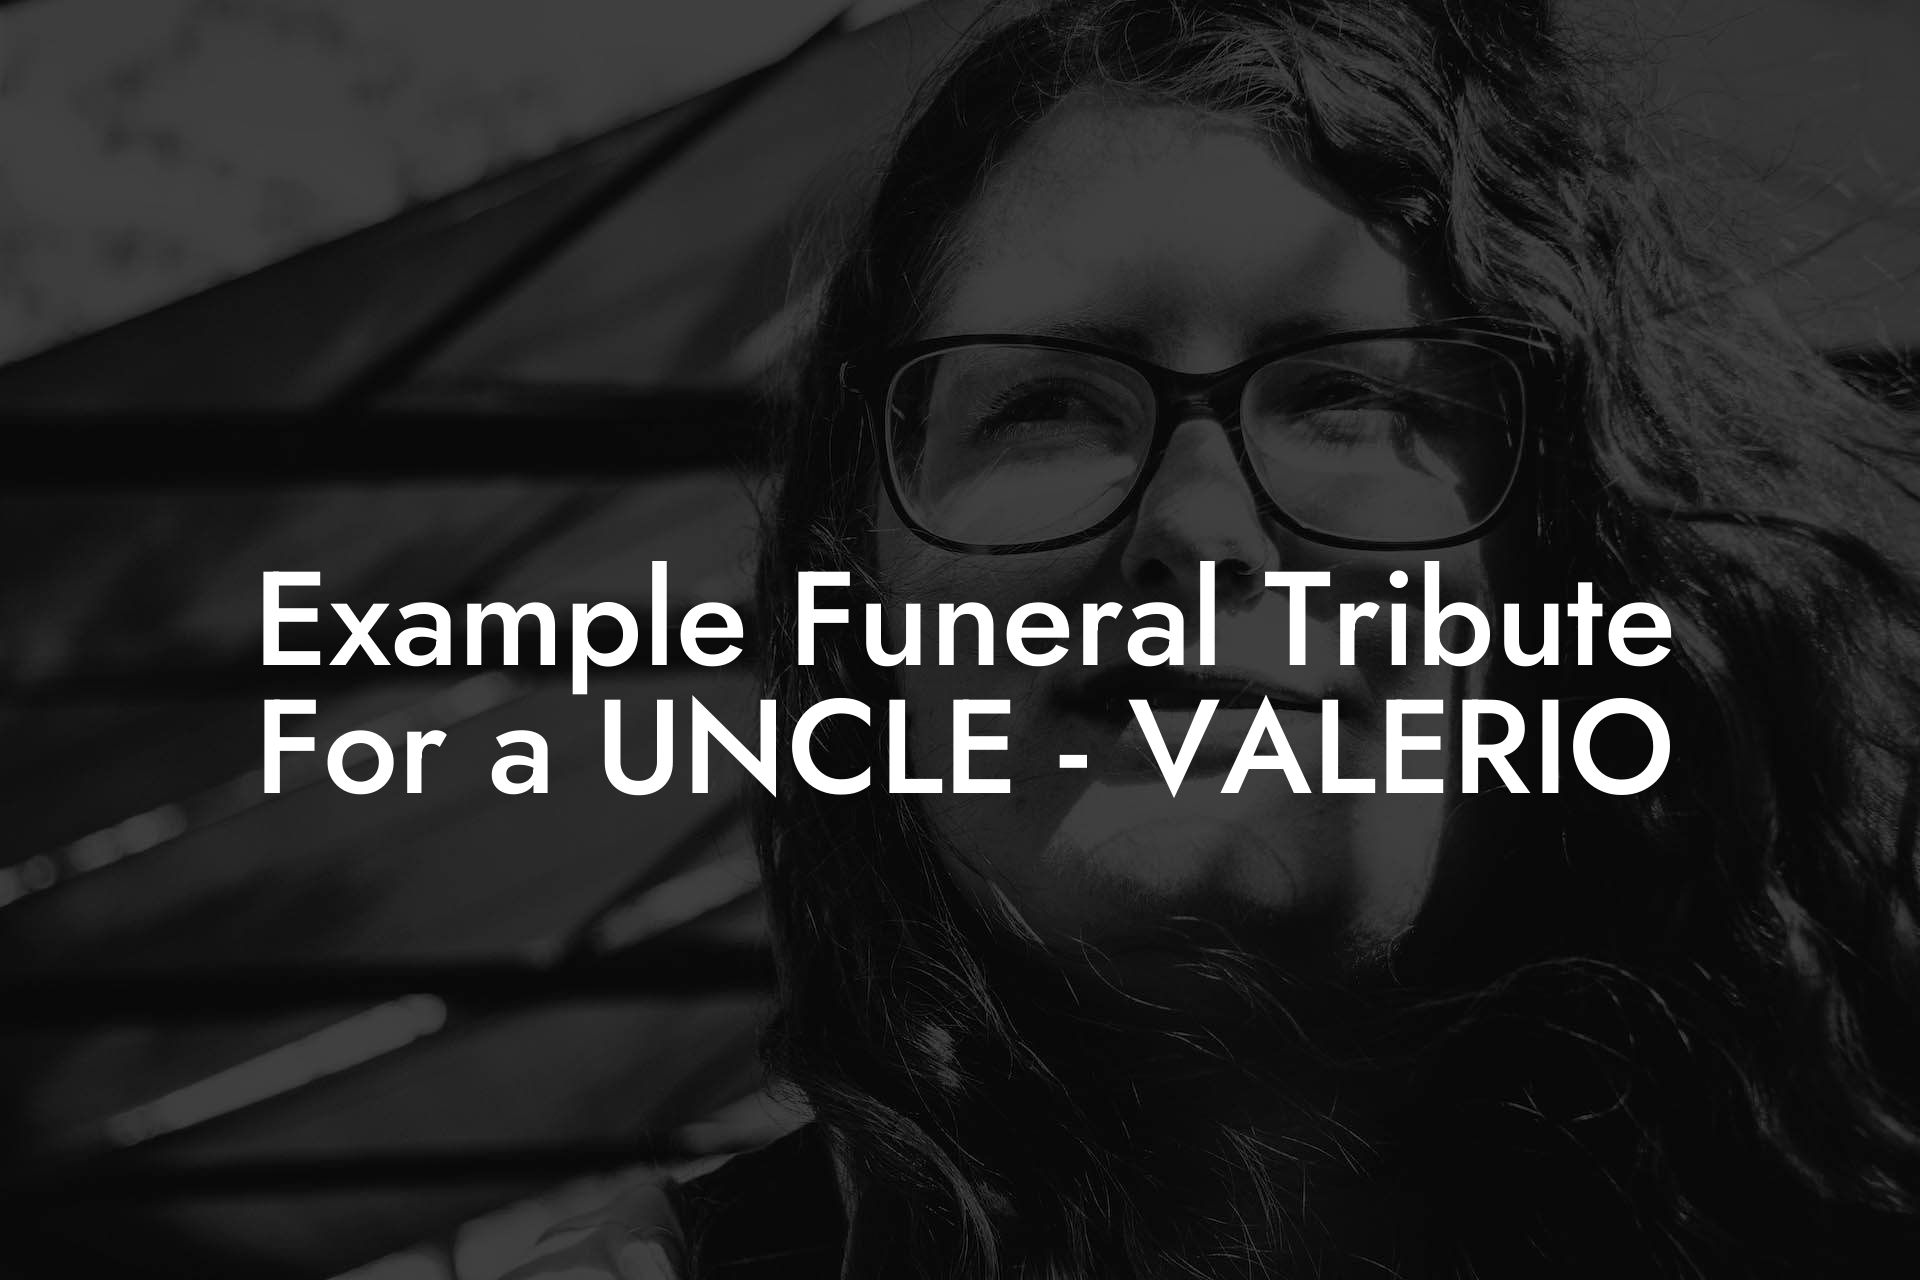 Example Funeral Tribute For a UNCLE - VALERIO